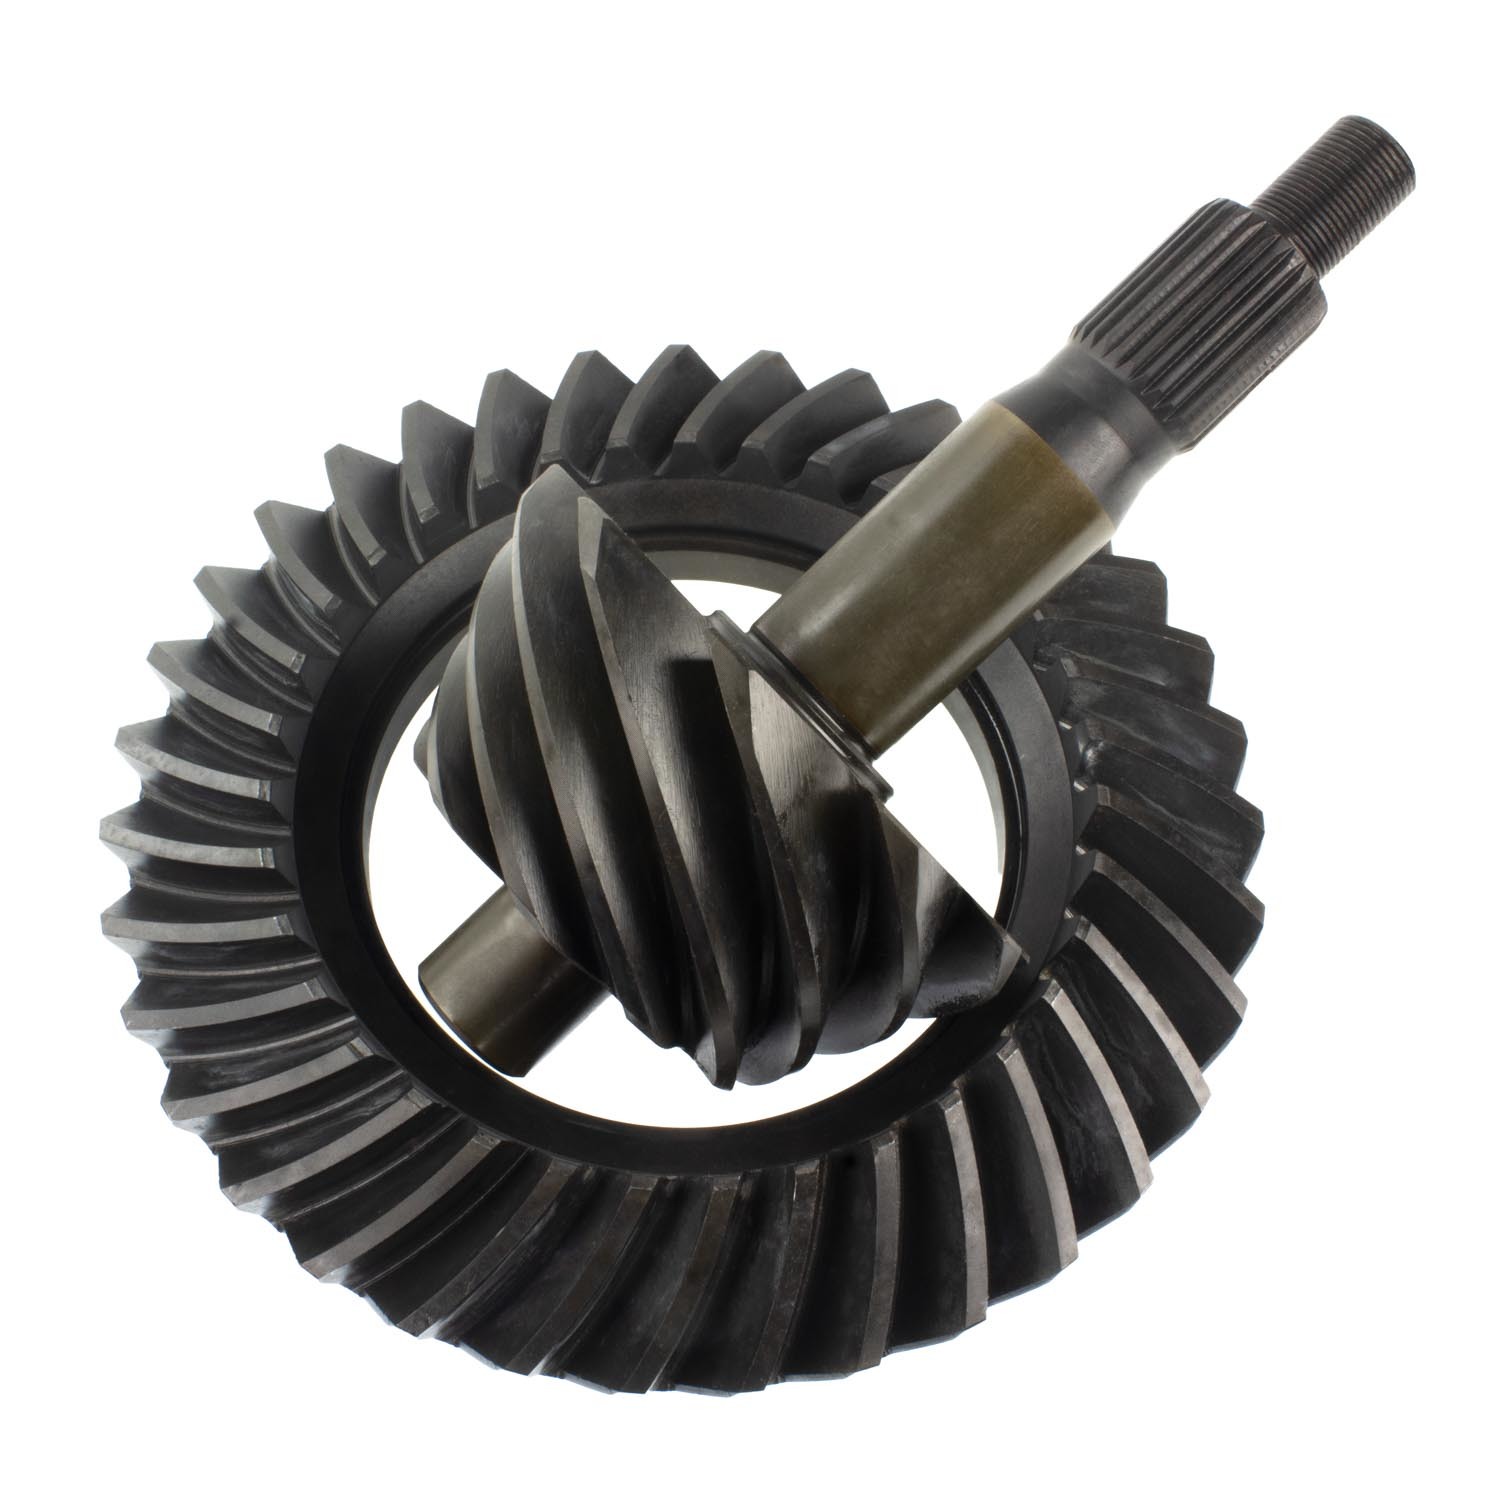 Richmond Gear F9350 - Ring and Pinion, Excel, 3.50 Ratio, 28 Spline Pinion, Ford 9 in, Kit